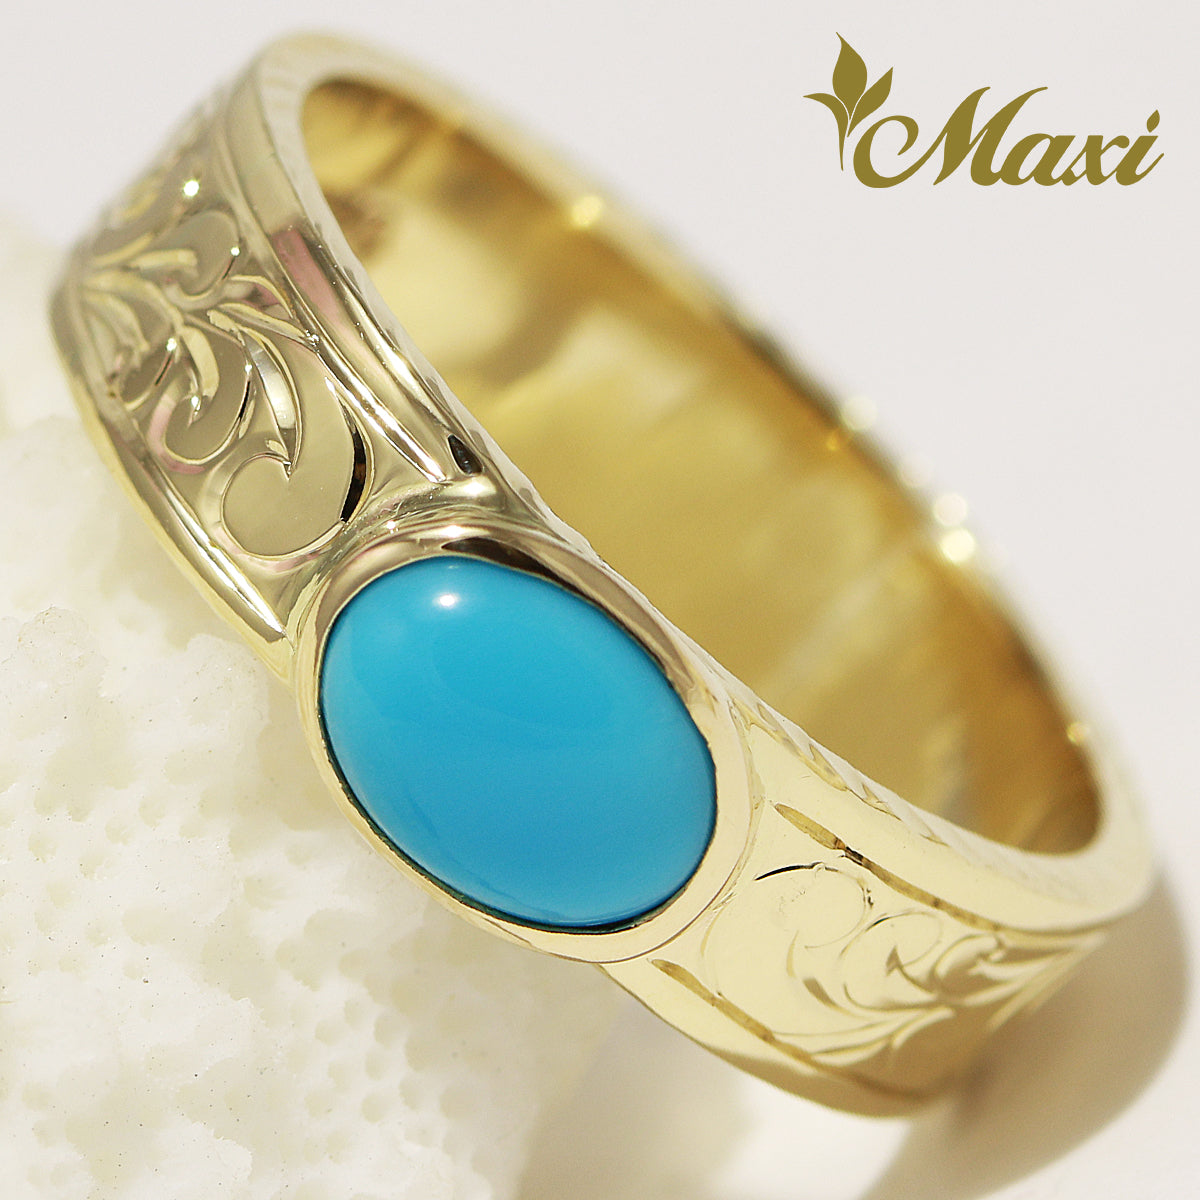 18ct Yellow Gold Turquoise Gypsy Ring - 1905